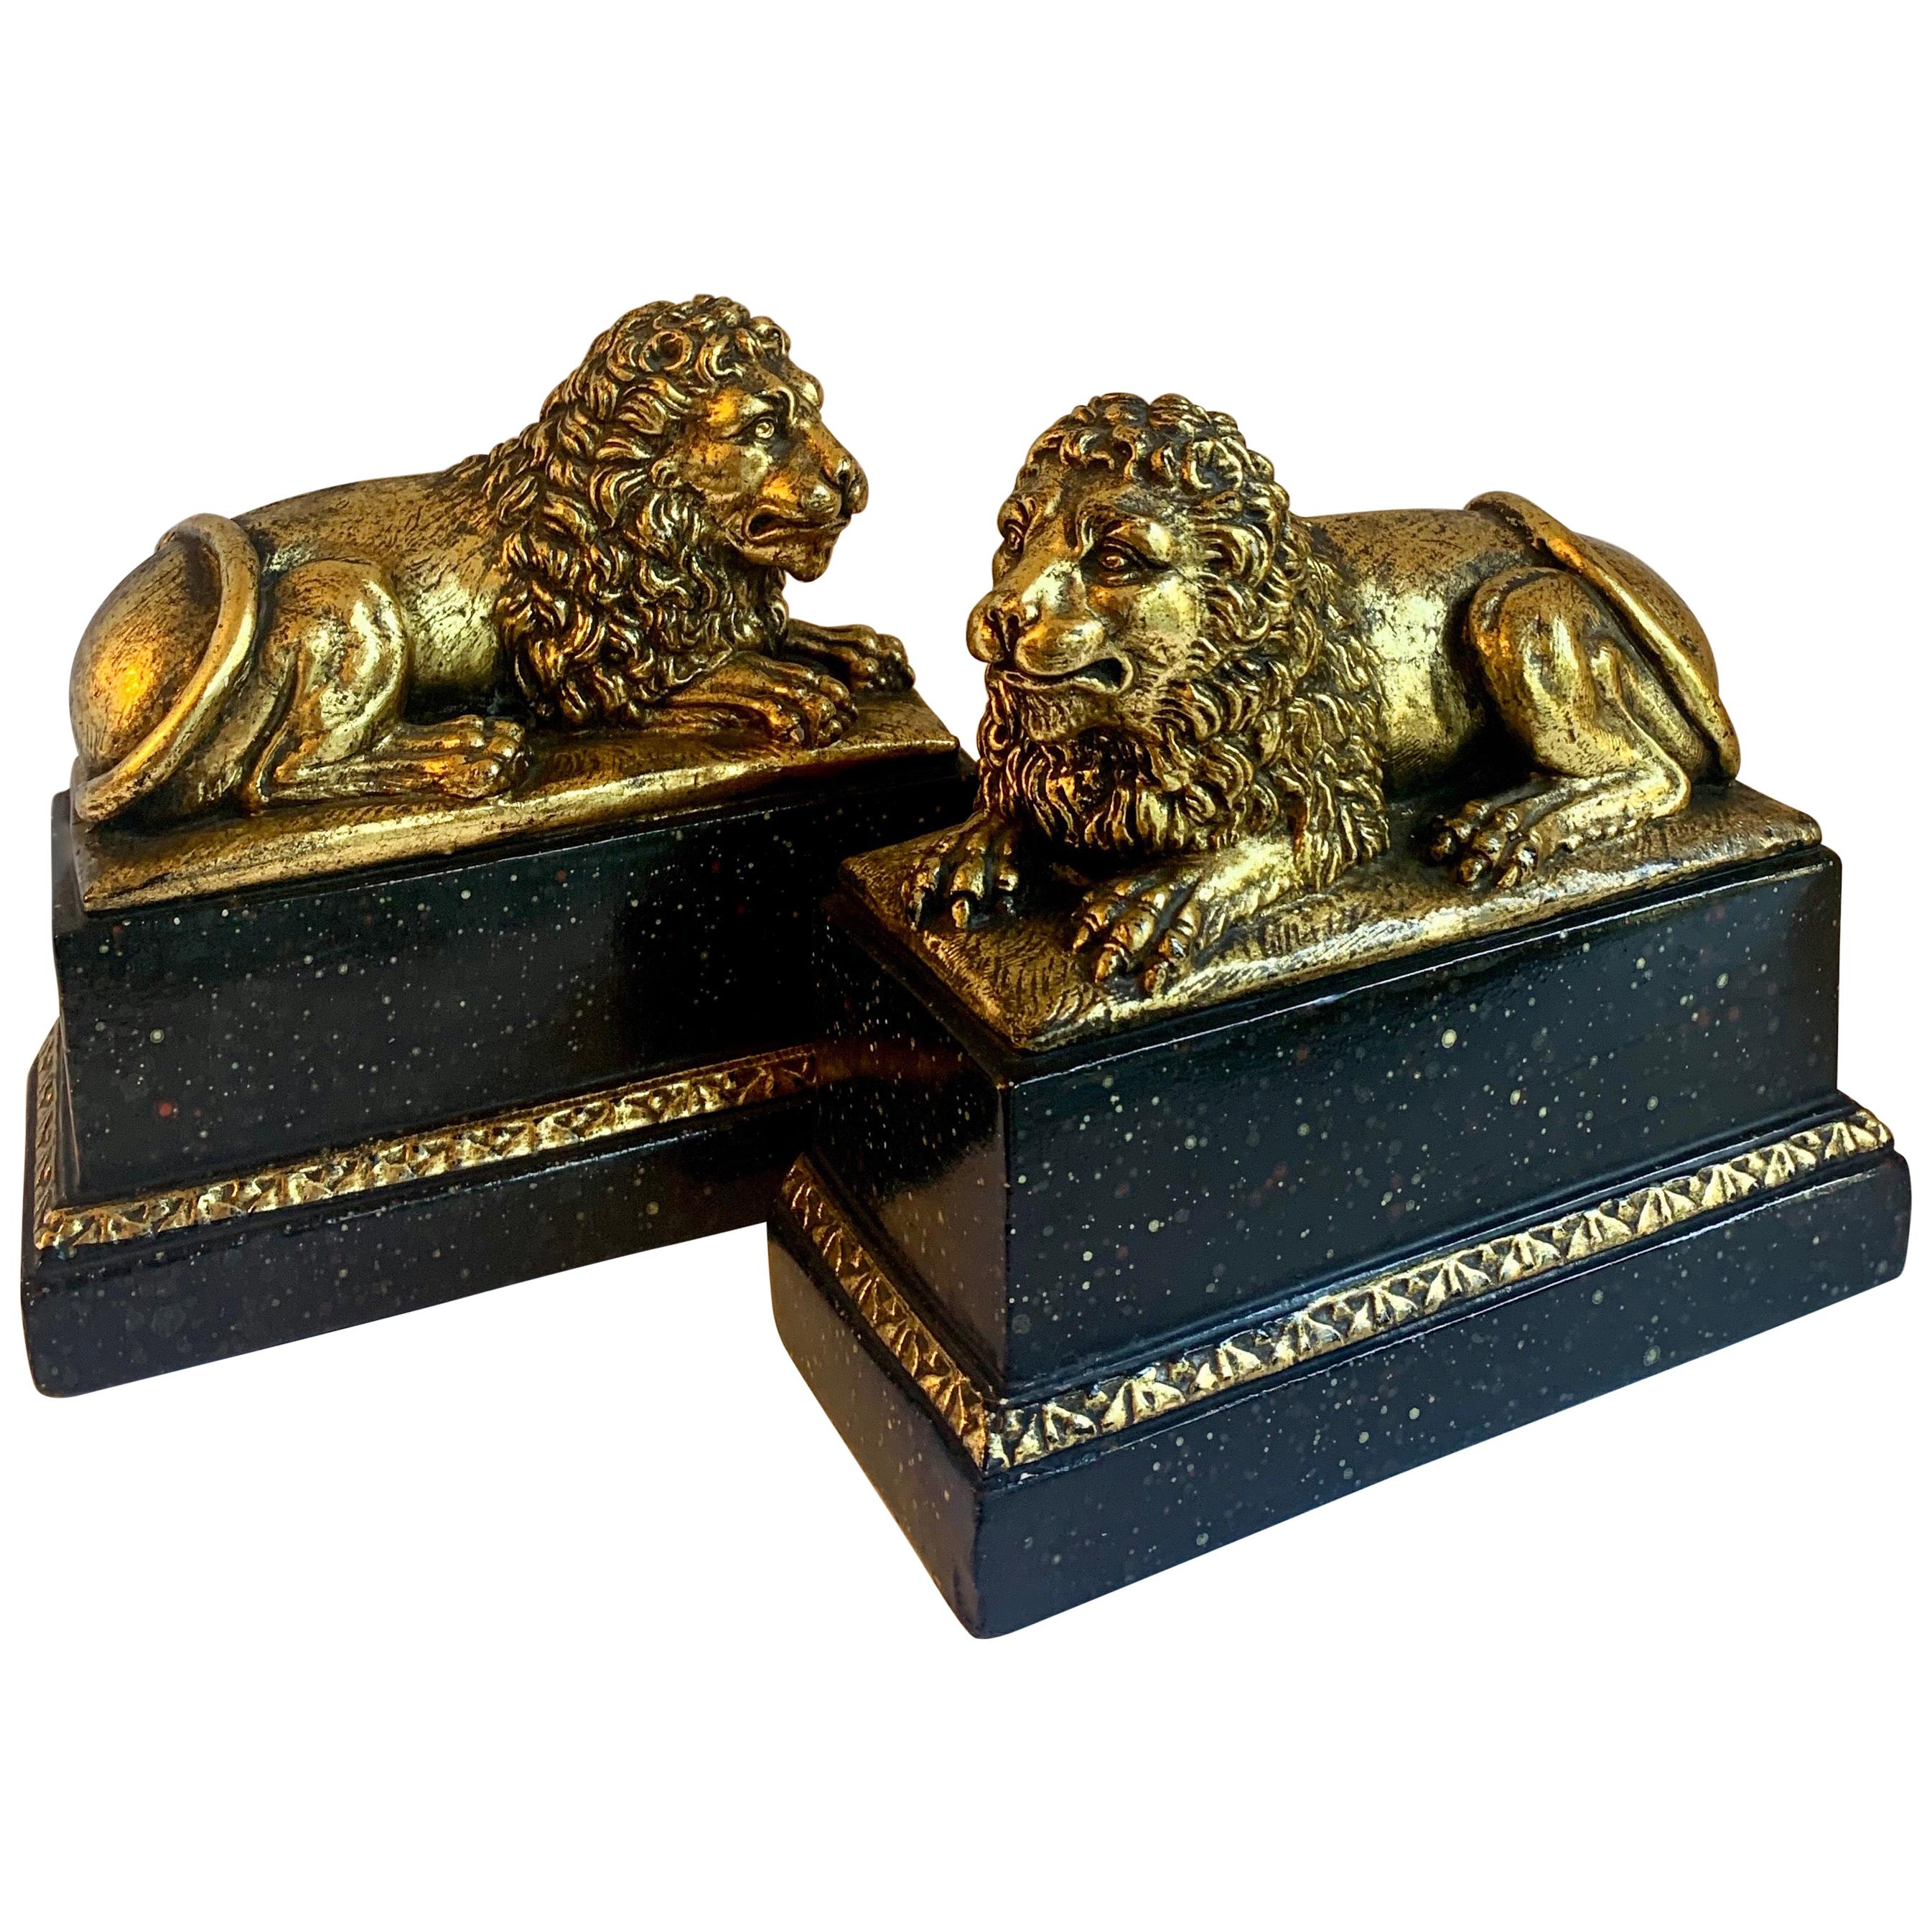 Pair of Gilt Reclining Lions on Black Stands